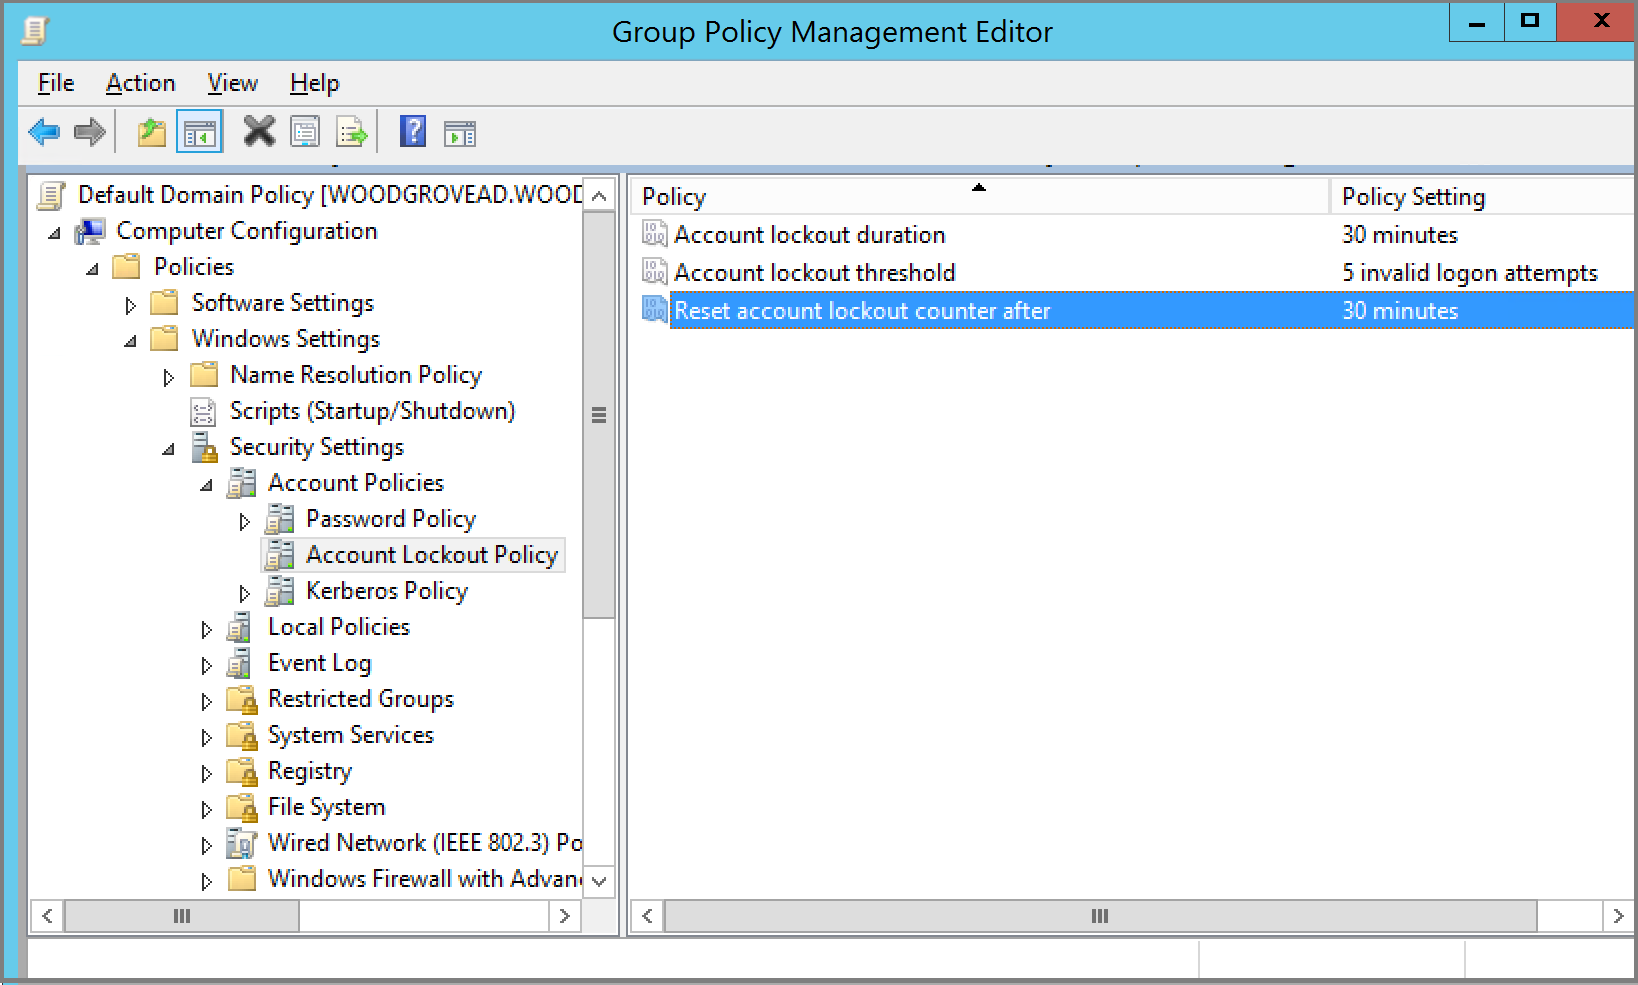 Modify the on-premises Active Directory account lockout policy